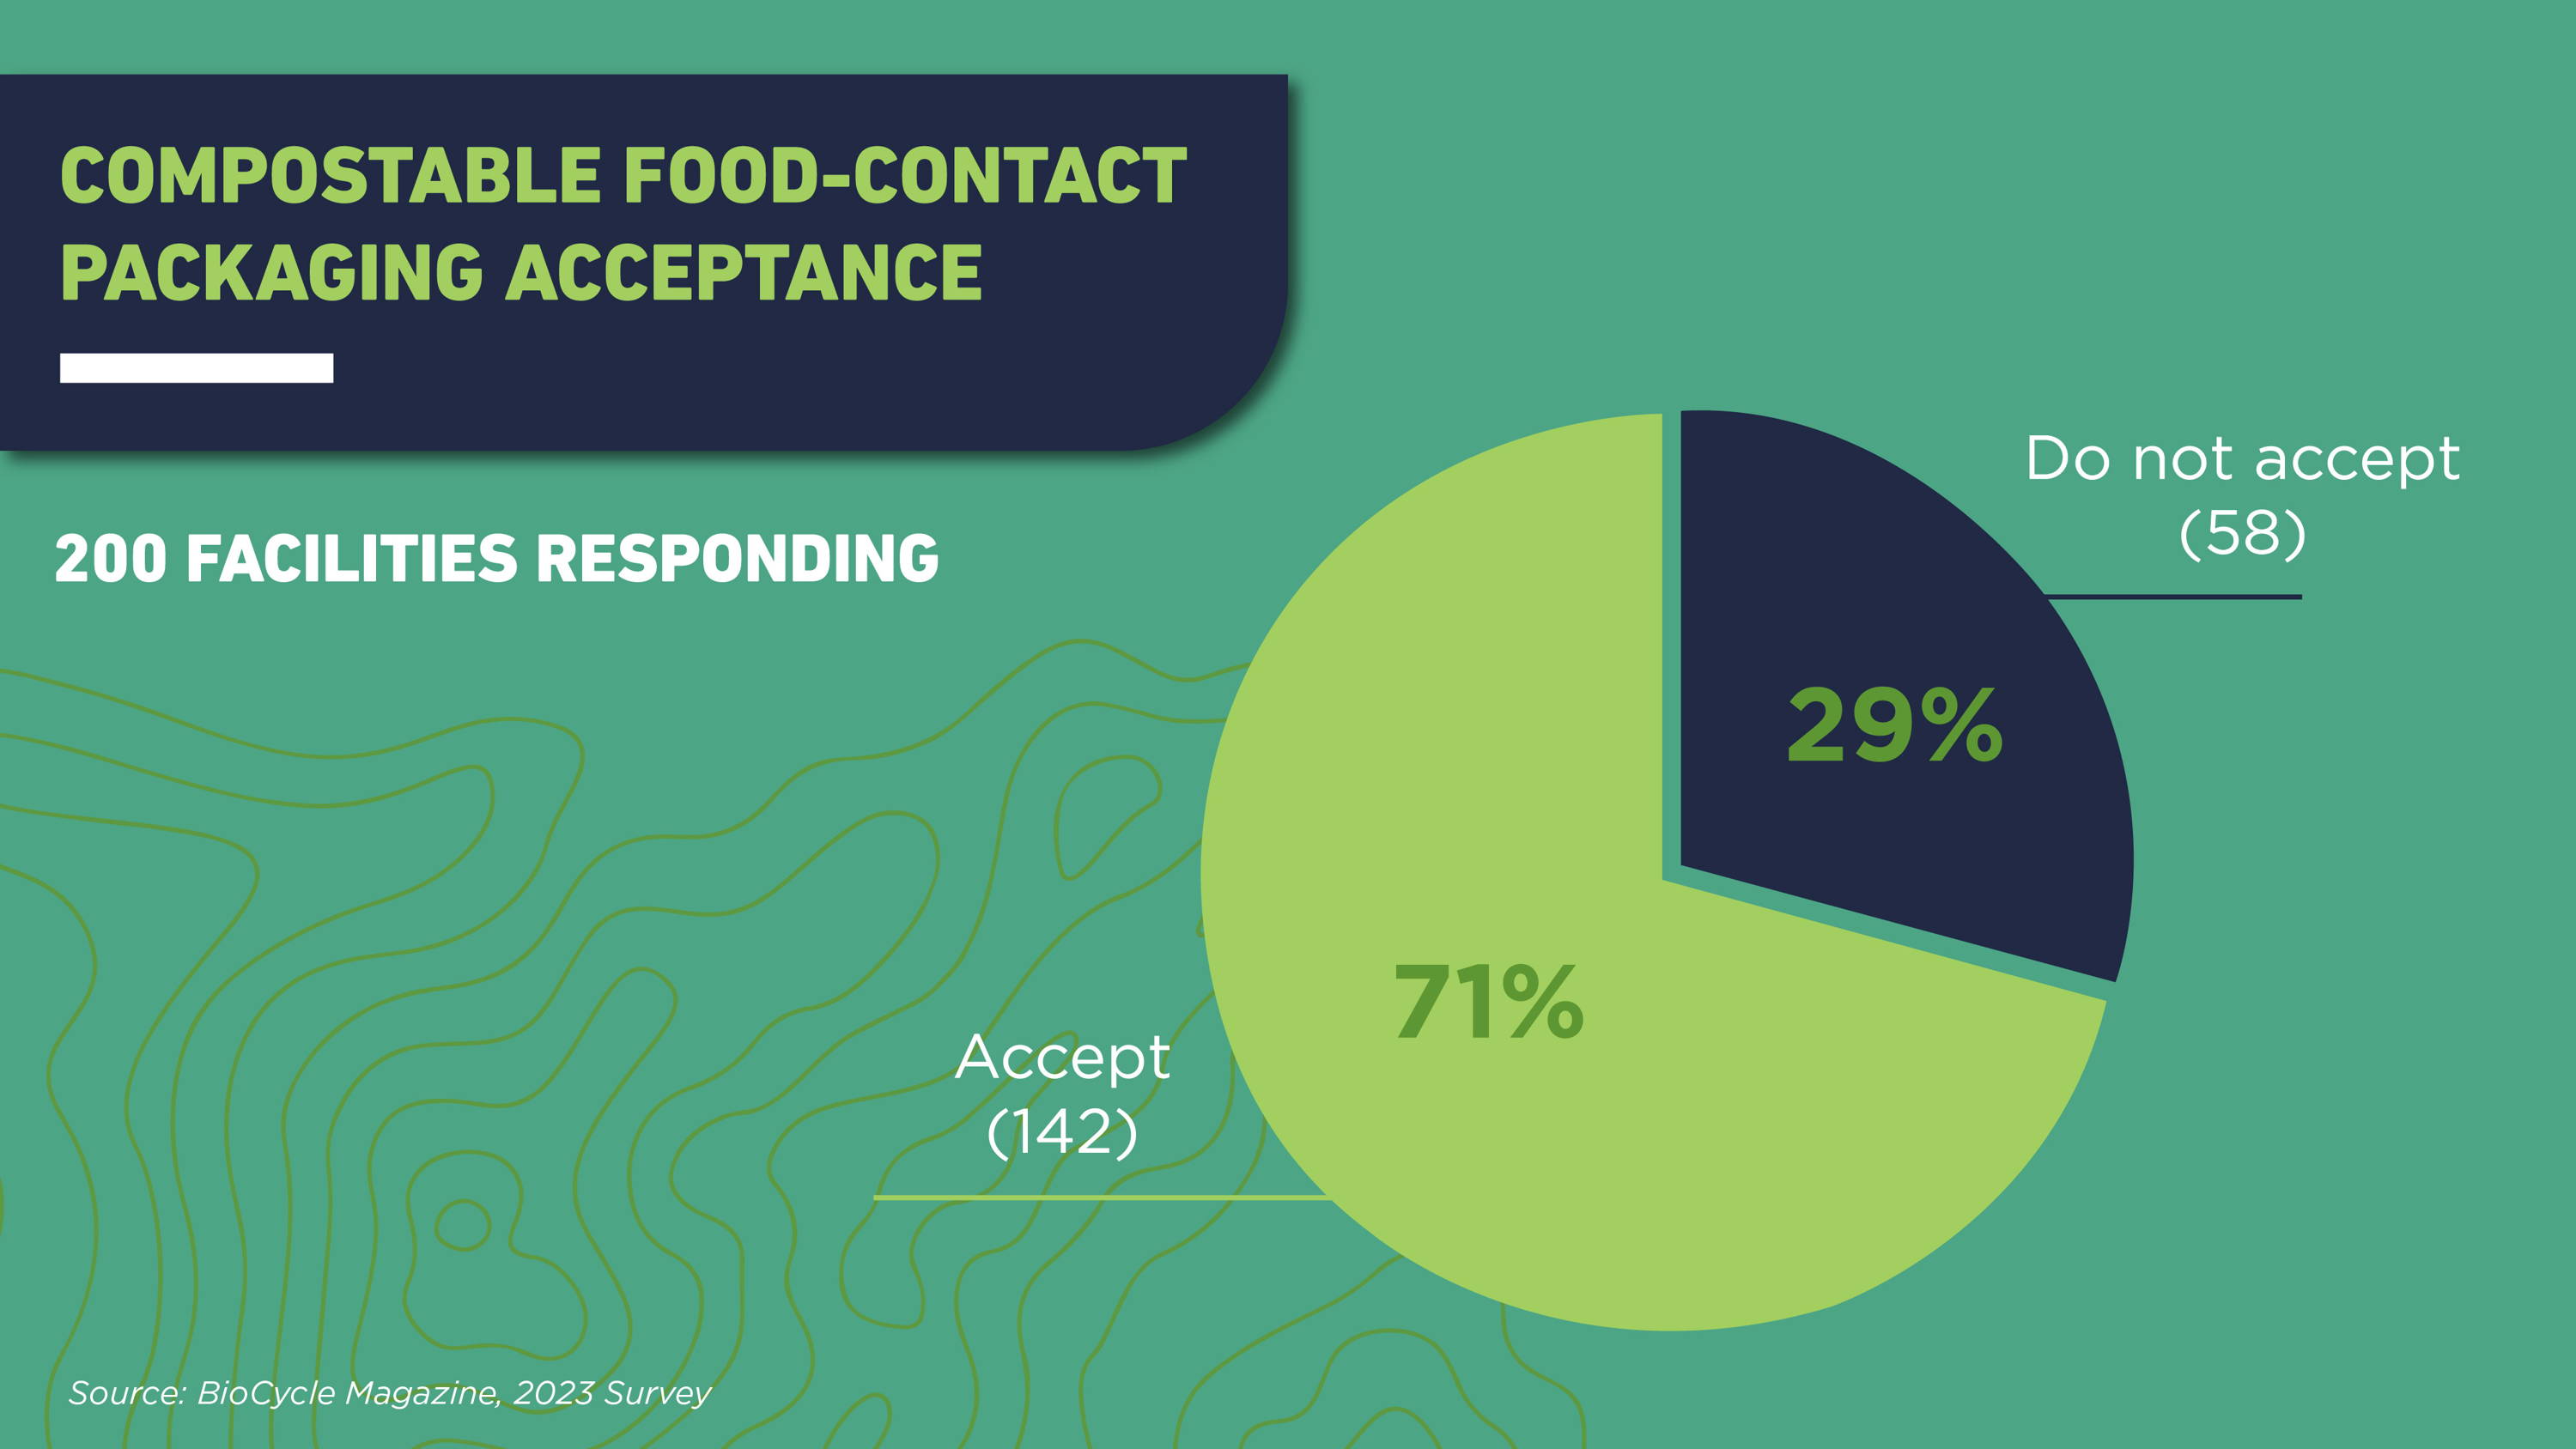 Graph showing 71% of composting facilities responding accept foodservice packaging and 29% do not